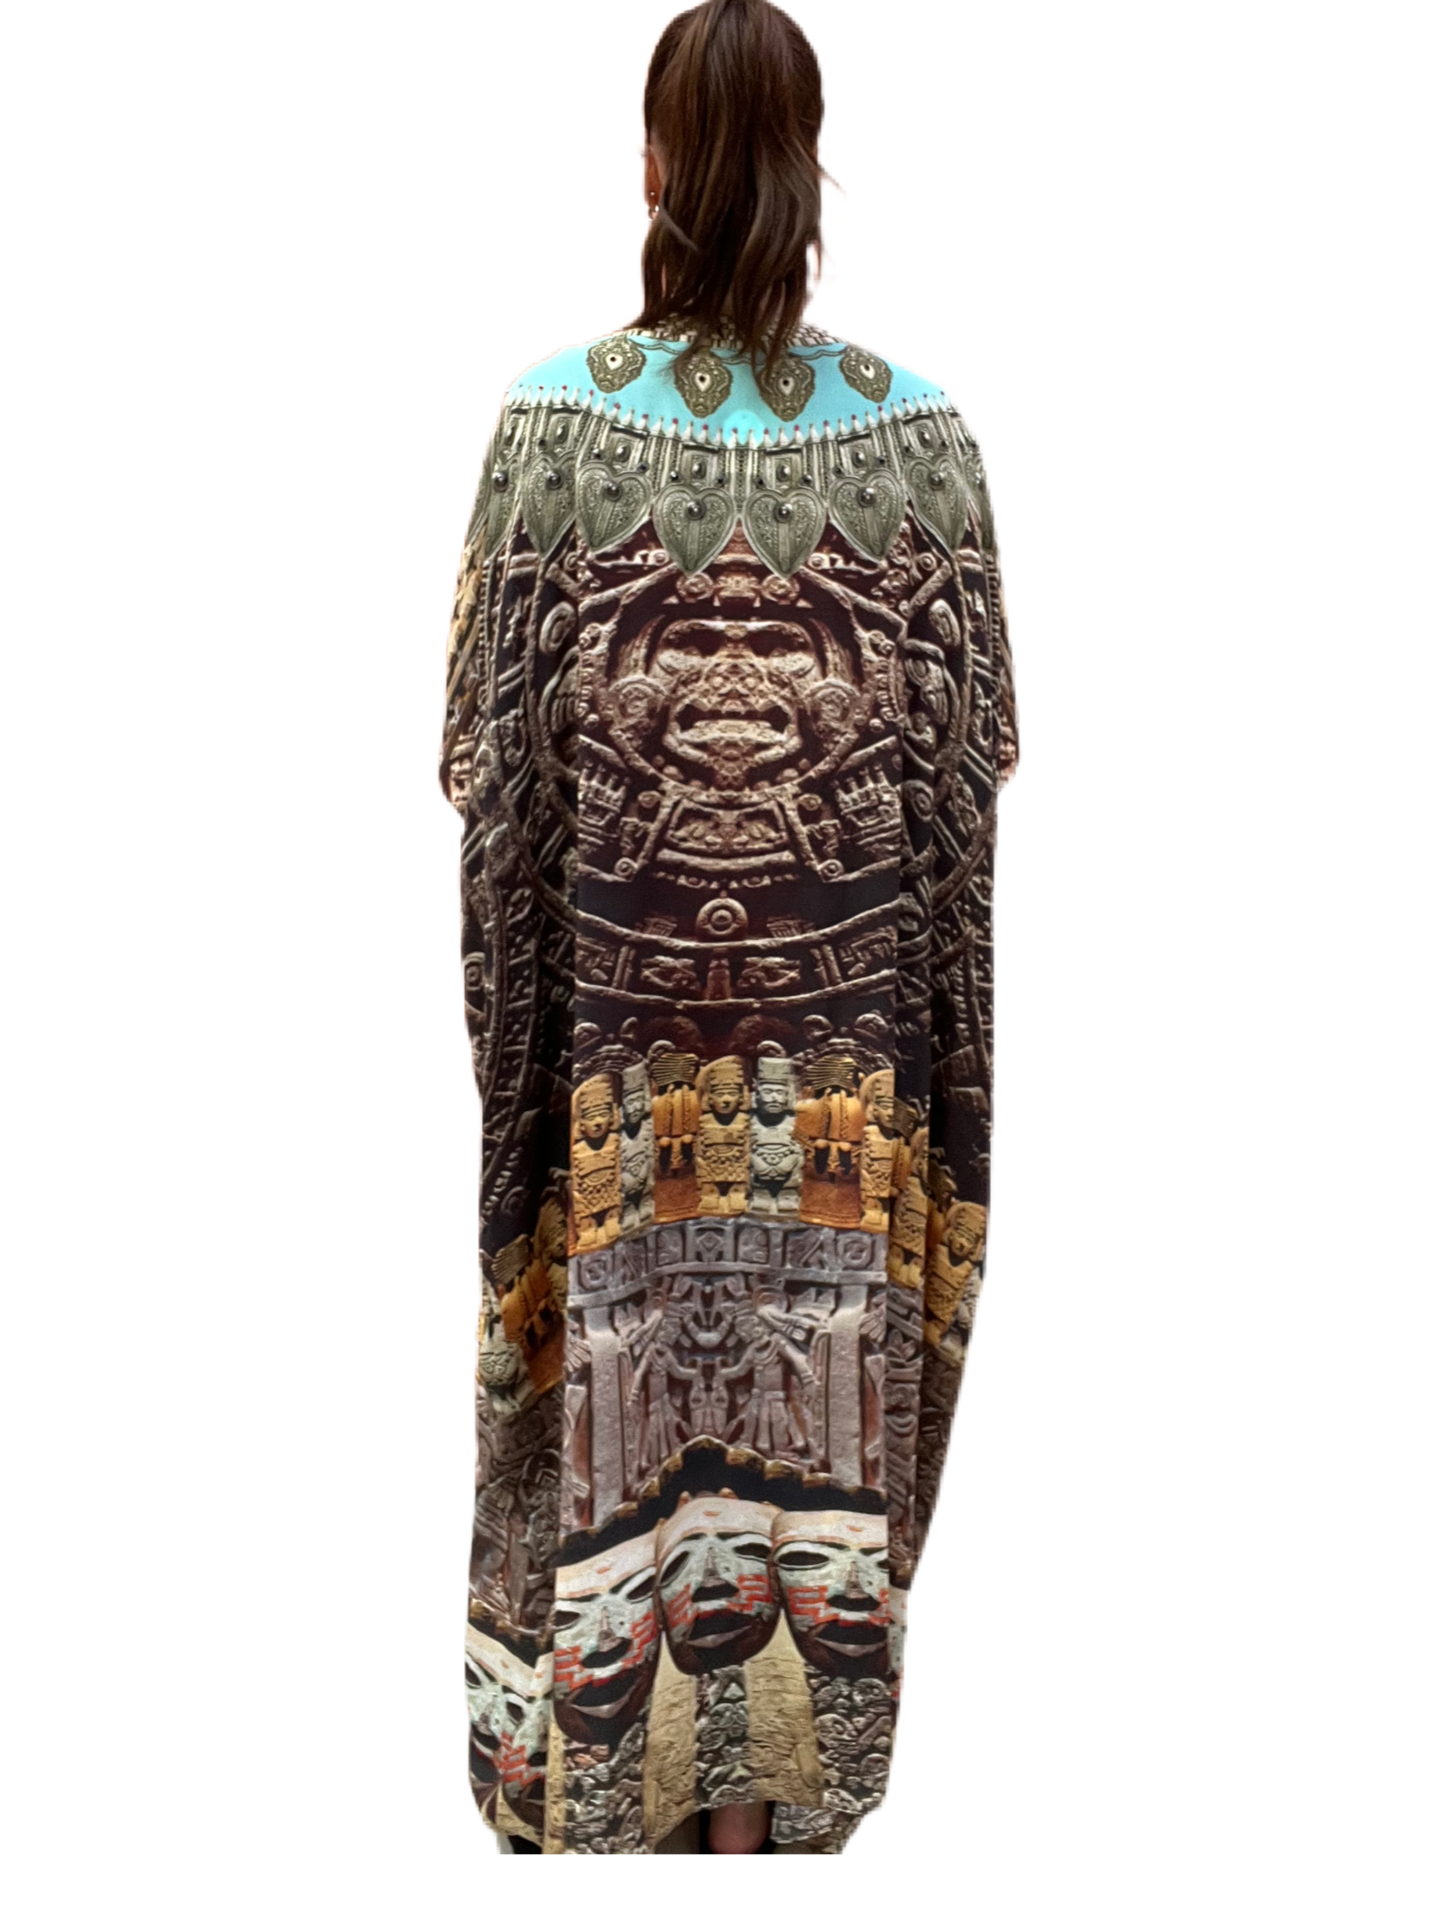 Camilla Aztec Print Dress [matching Jacket not included]. One Size.